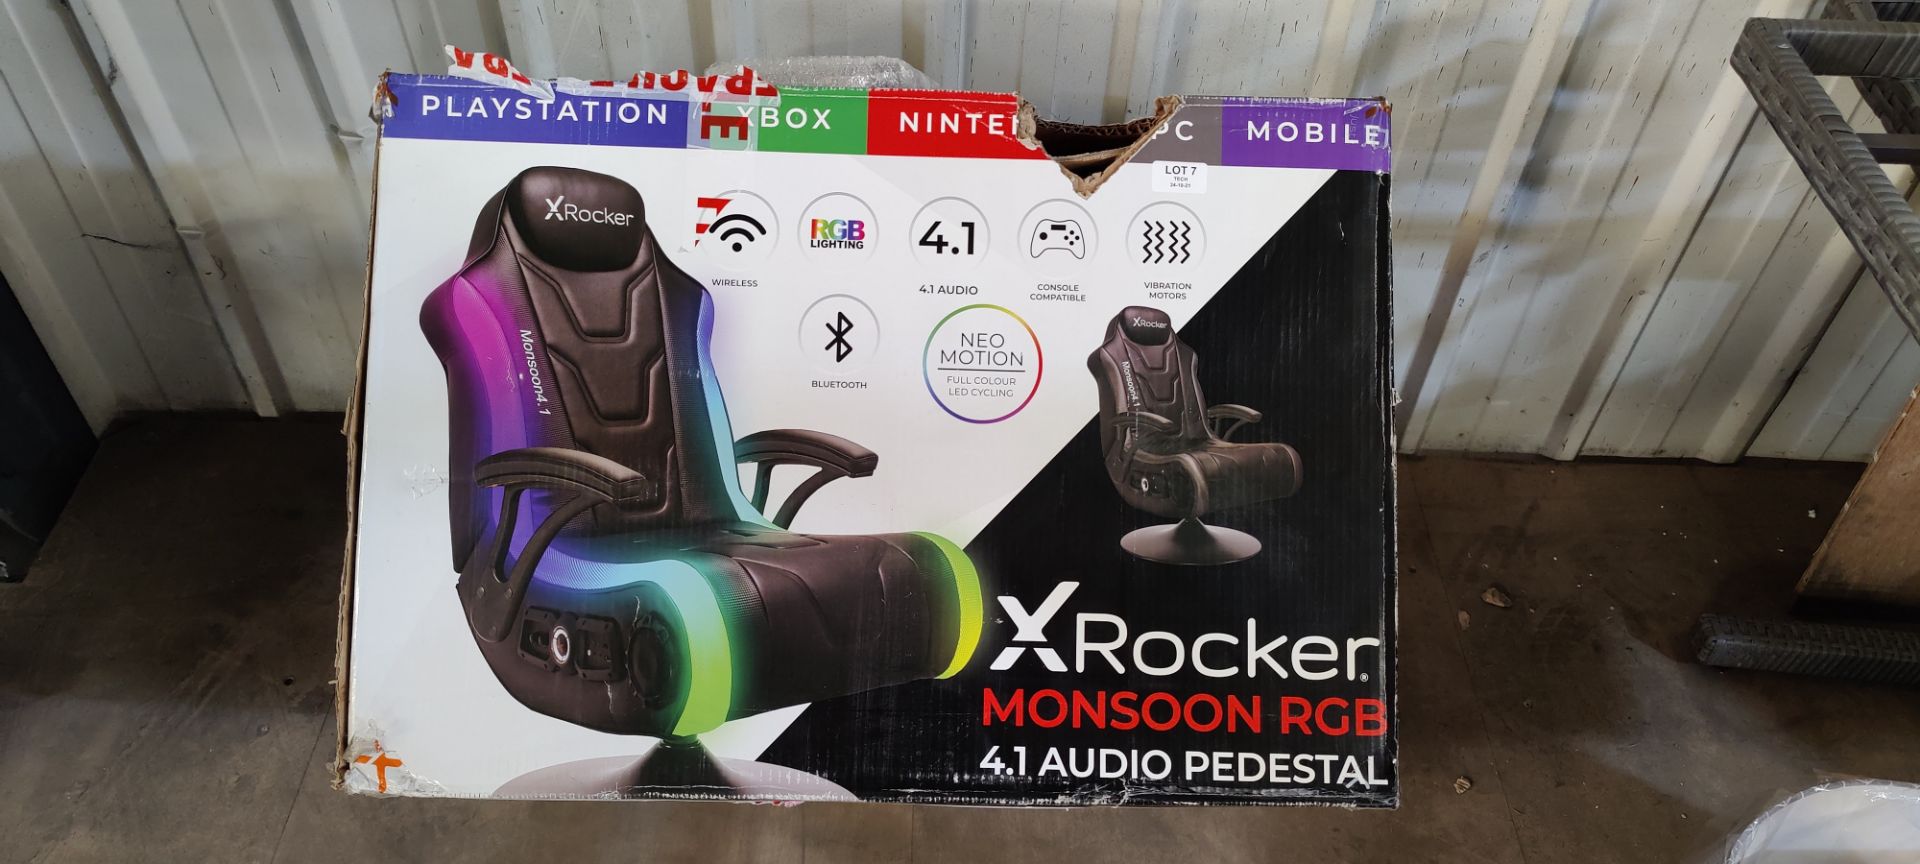 (P1) 1x X-Rocker Monsoon RGB 4.1 Audio Pedestal Gaming Chair RRP £269. Unit Appears Complete, Box - Image 2 of 5